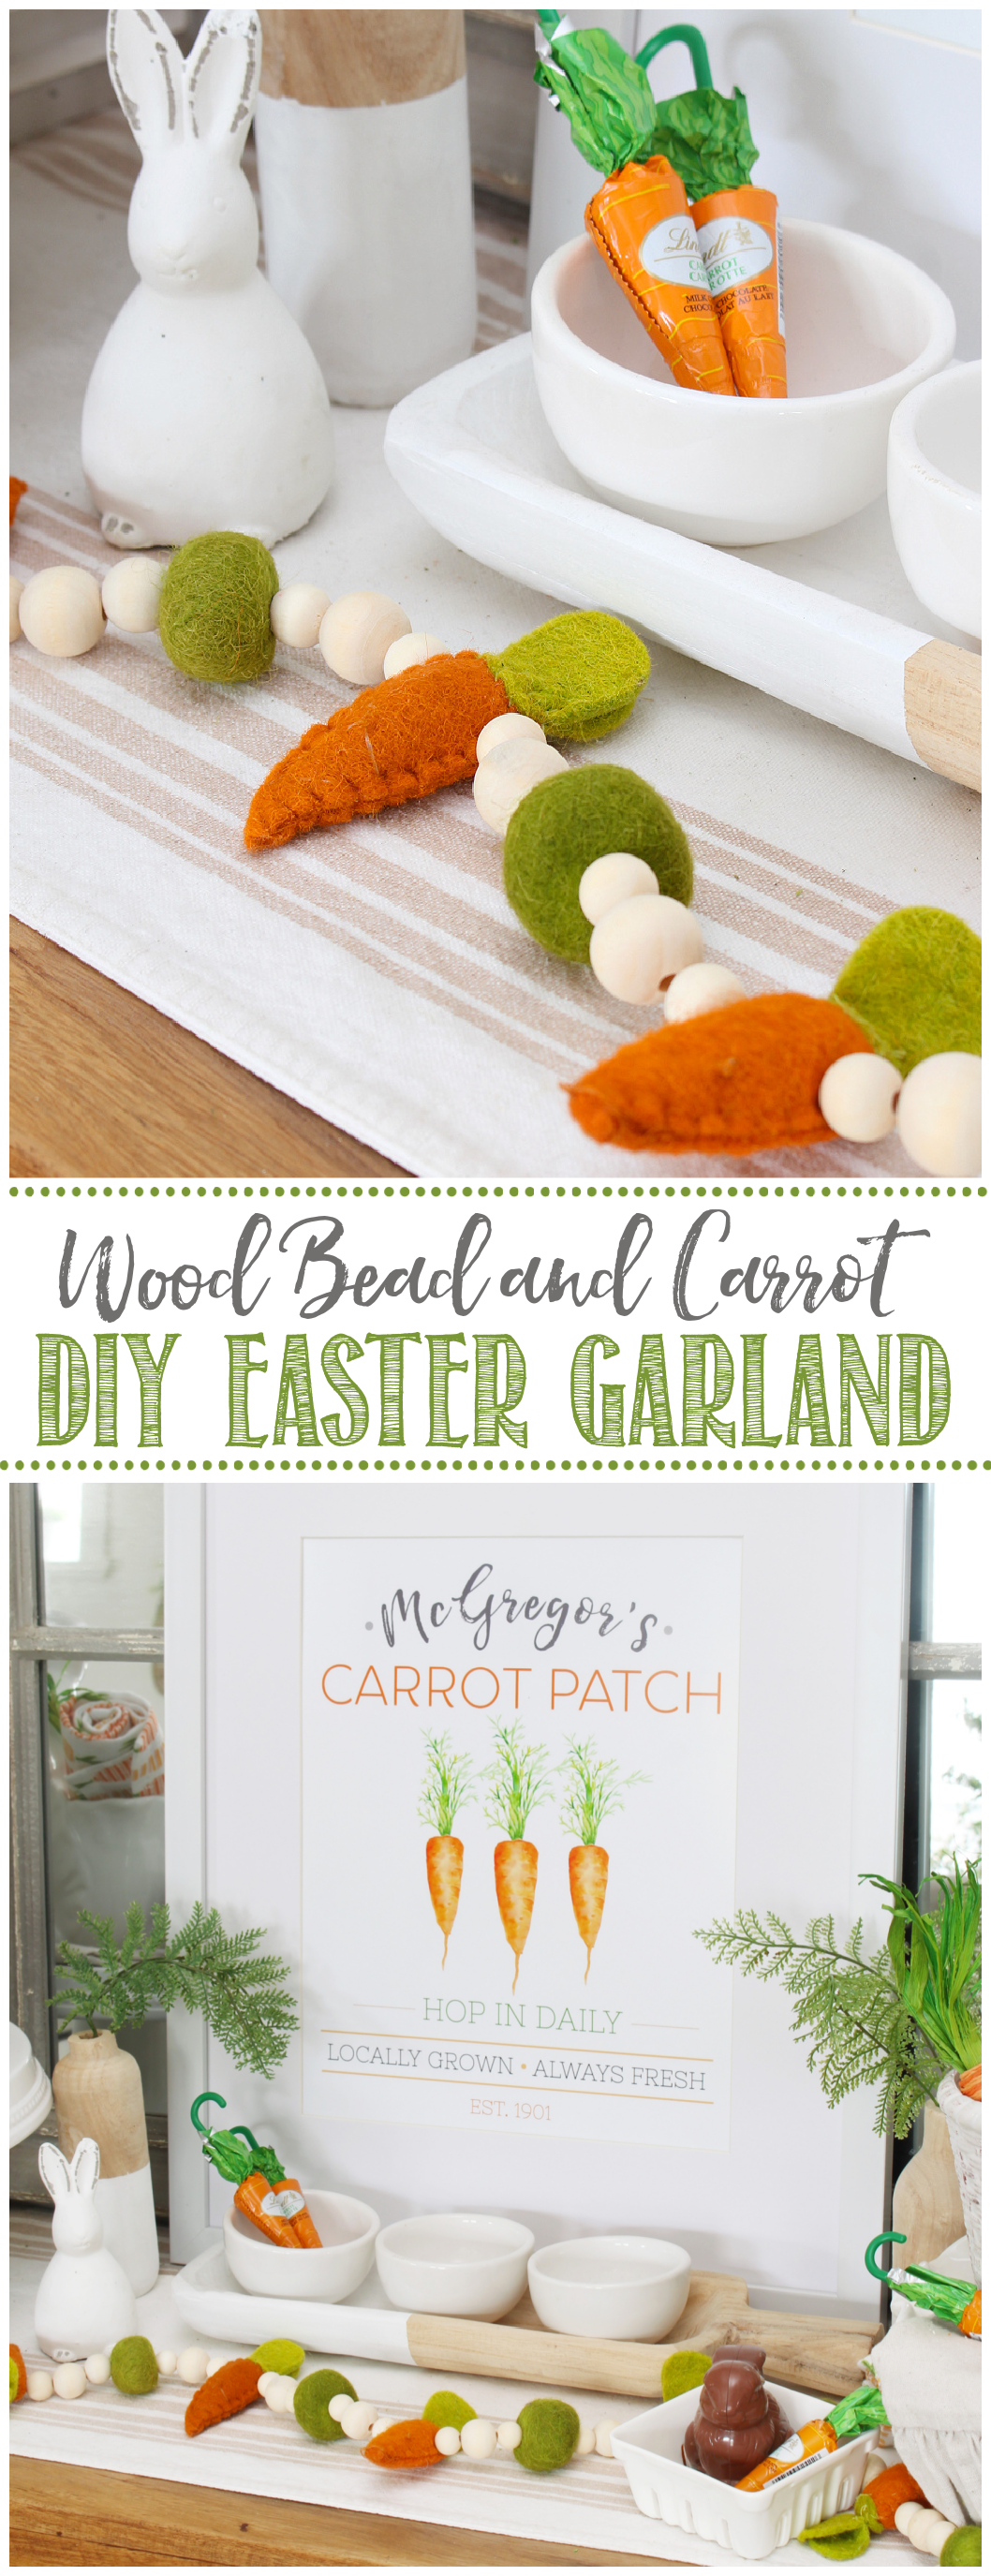 Felted carrot and wood bead Easter garland in an Easter vignette.